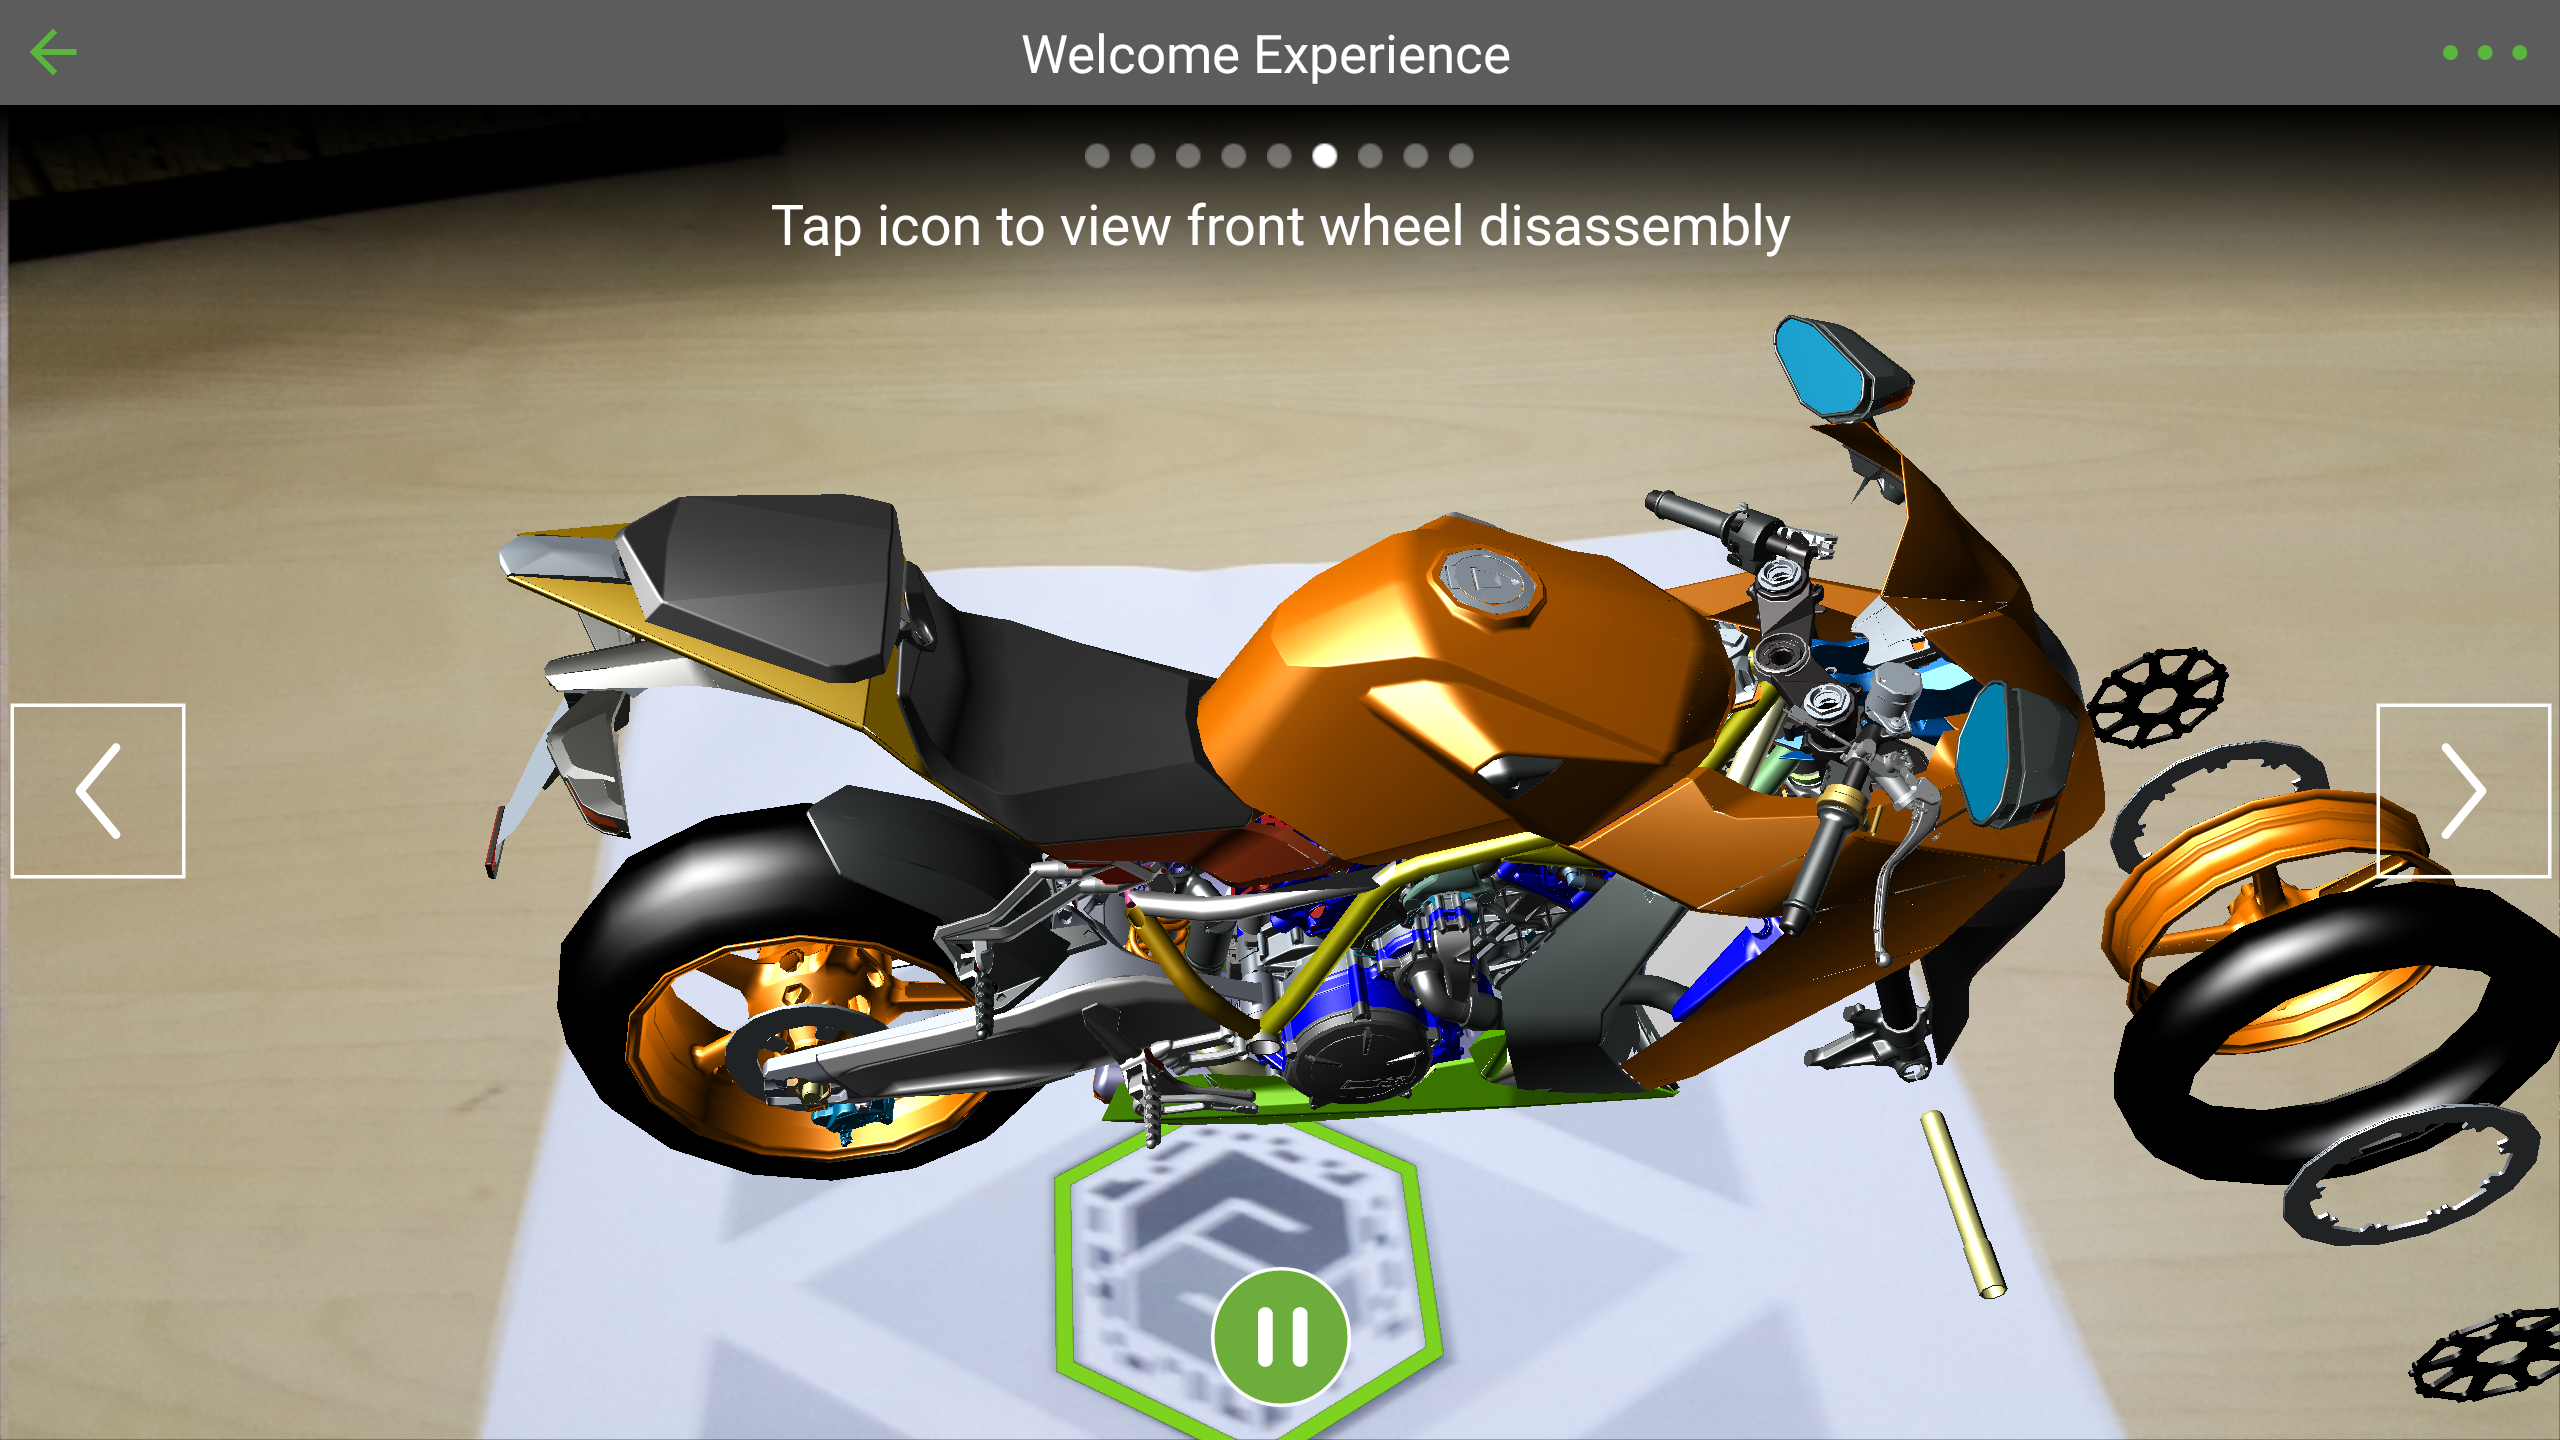 In product service situations, AR experiences can depict disassembly/assembly sequences